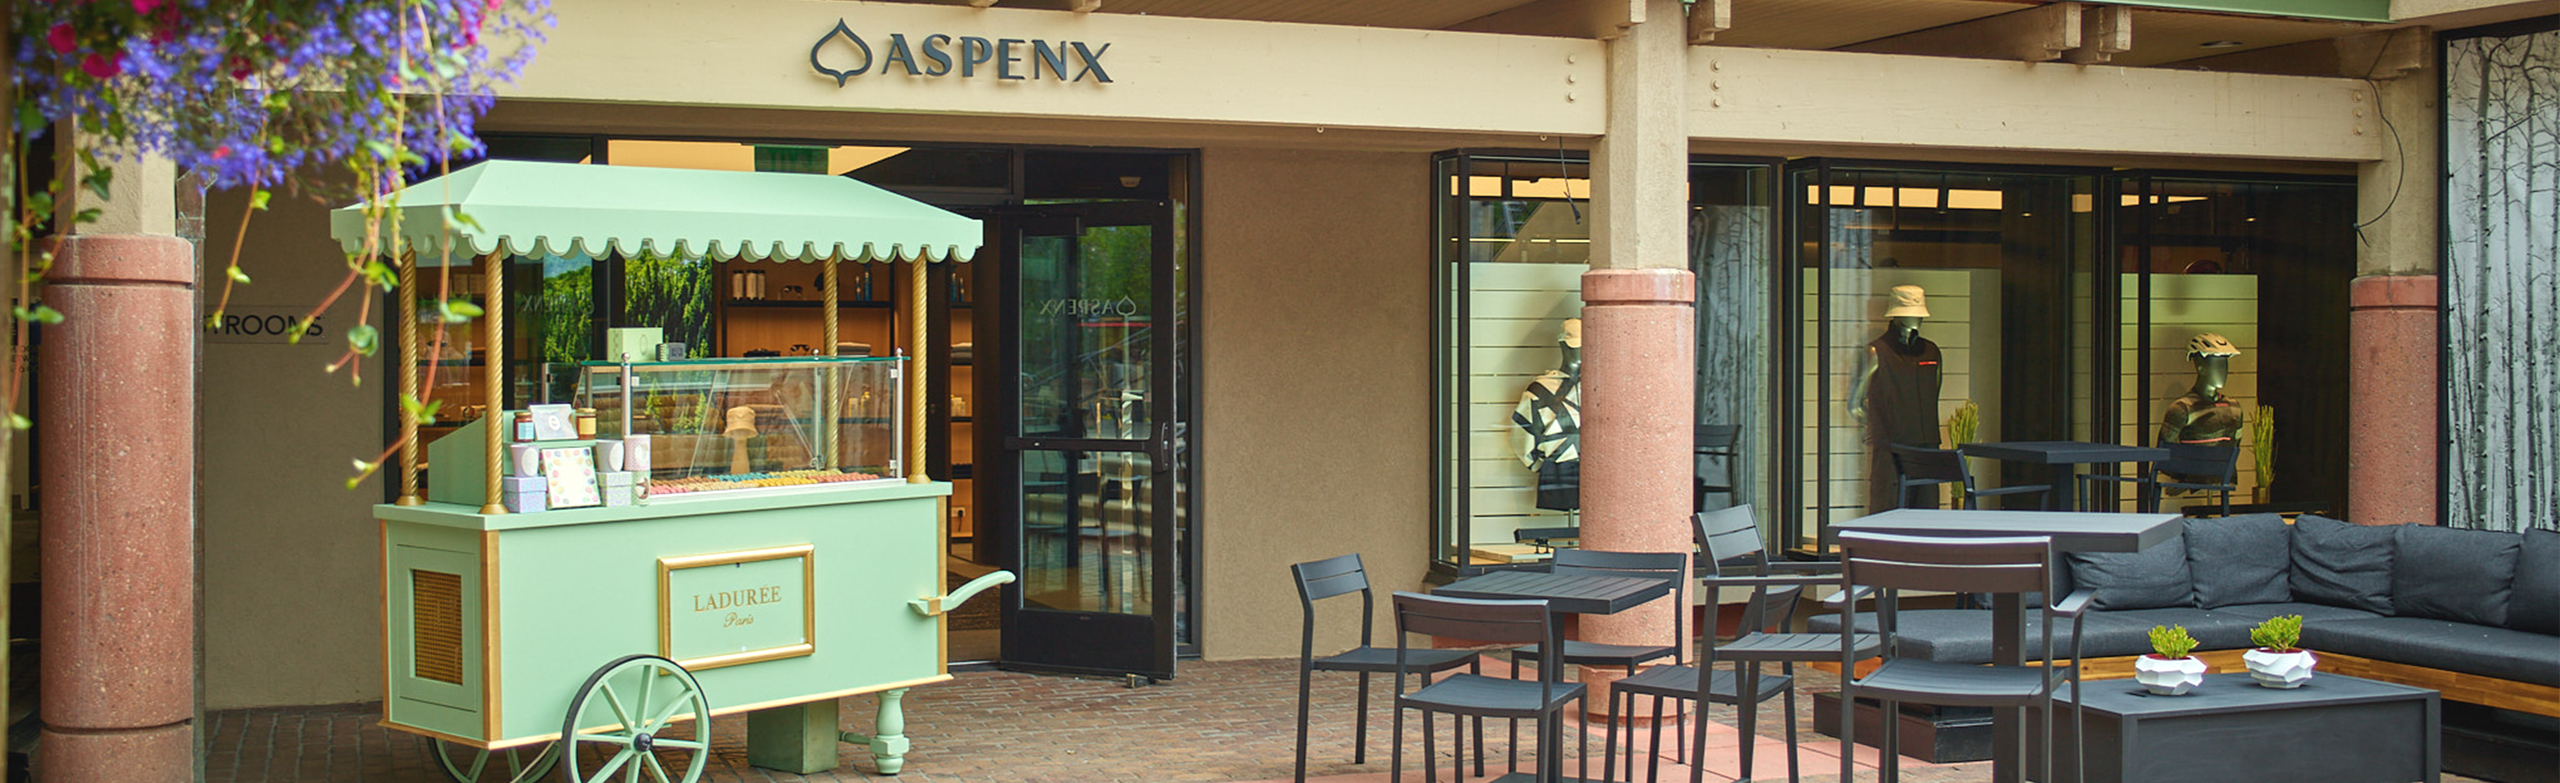 Discover our new location at aspenx... at the base of the Aspen mountain